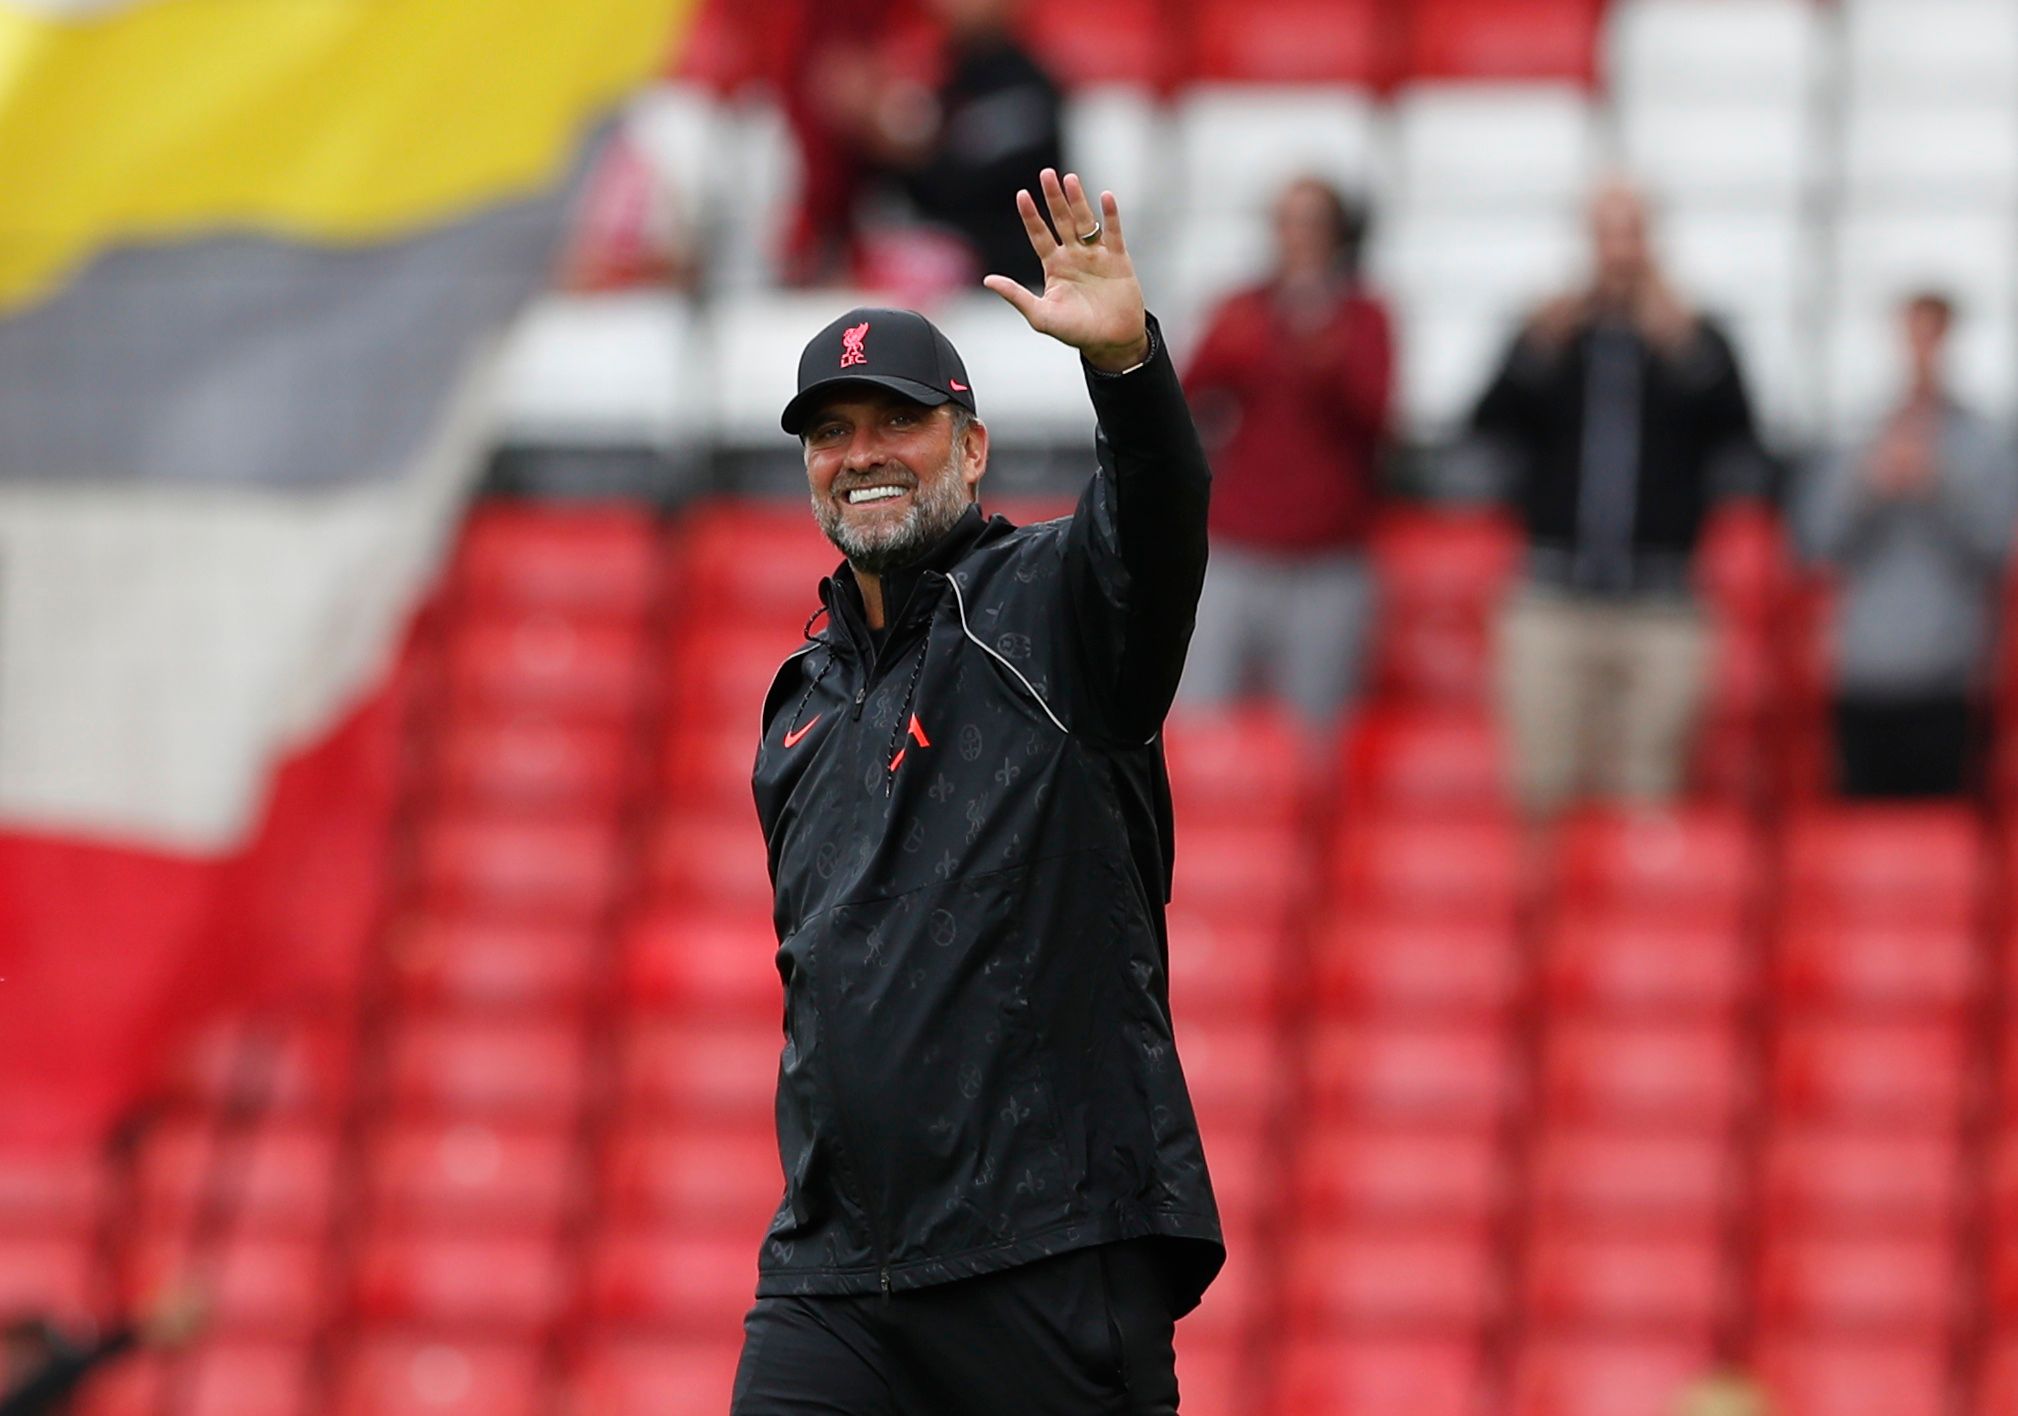 Soccer Football - Pre Season Friendly - Liverpool v Athletic Bilbao - Anfield, Liverpool, Britain - August 8, 2021  Liverpool manager Jurgen Klopp waves to the fans before the match Action Images via Reuters/Lee Smith